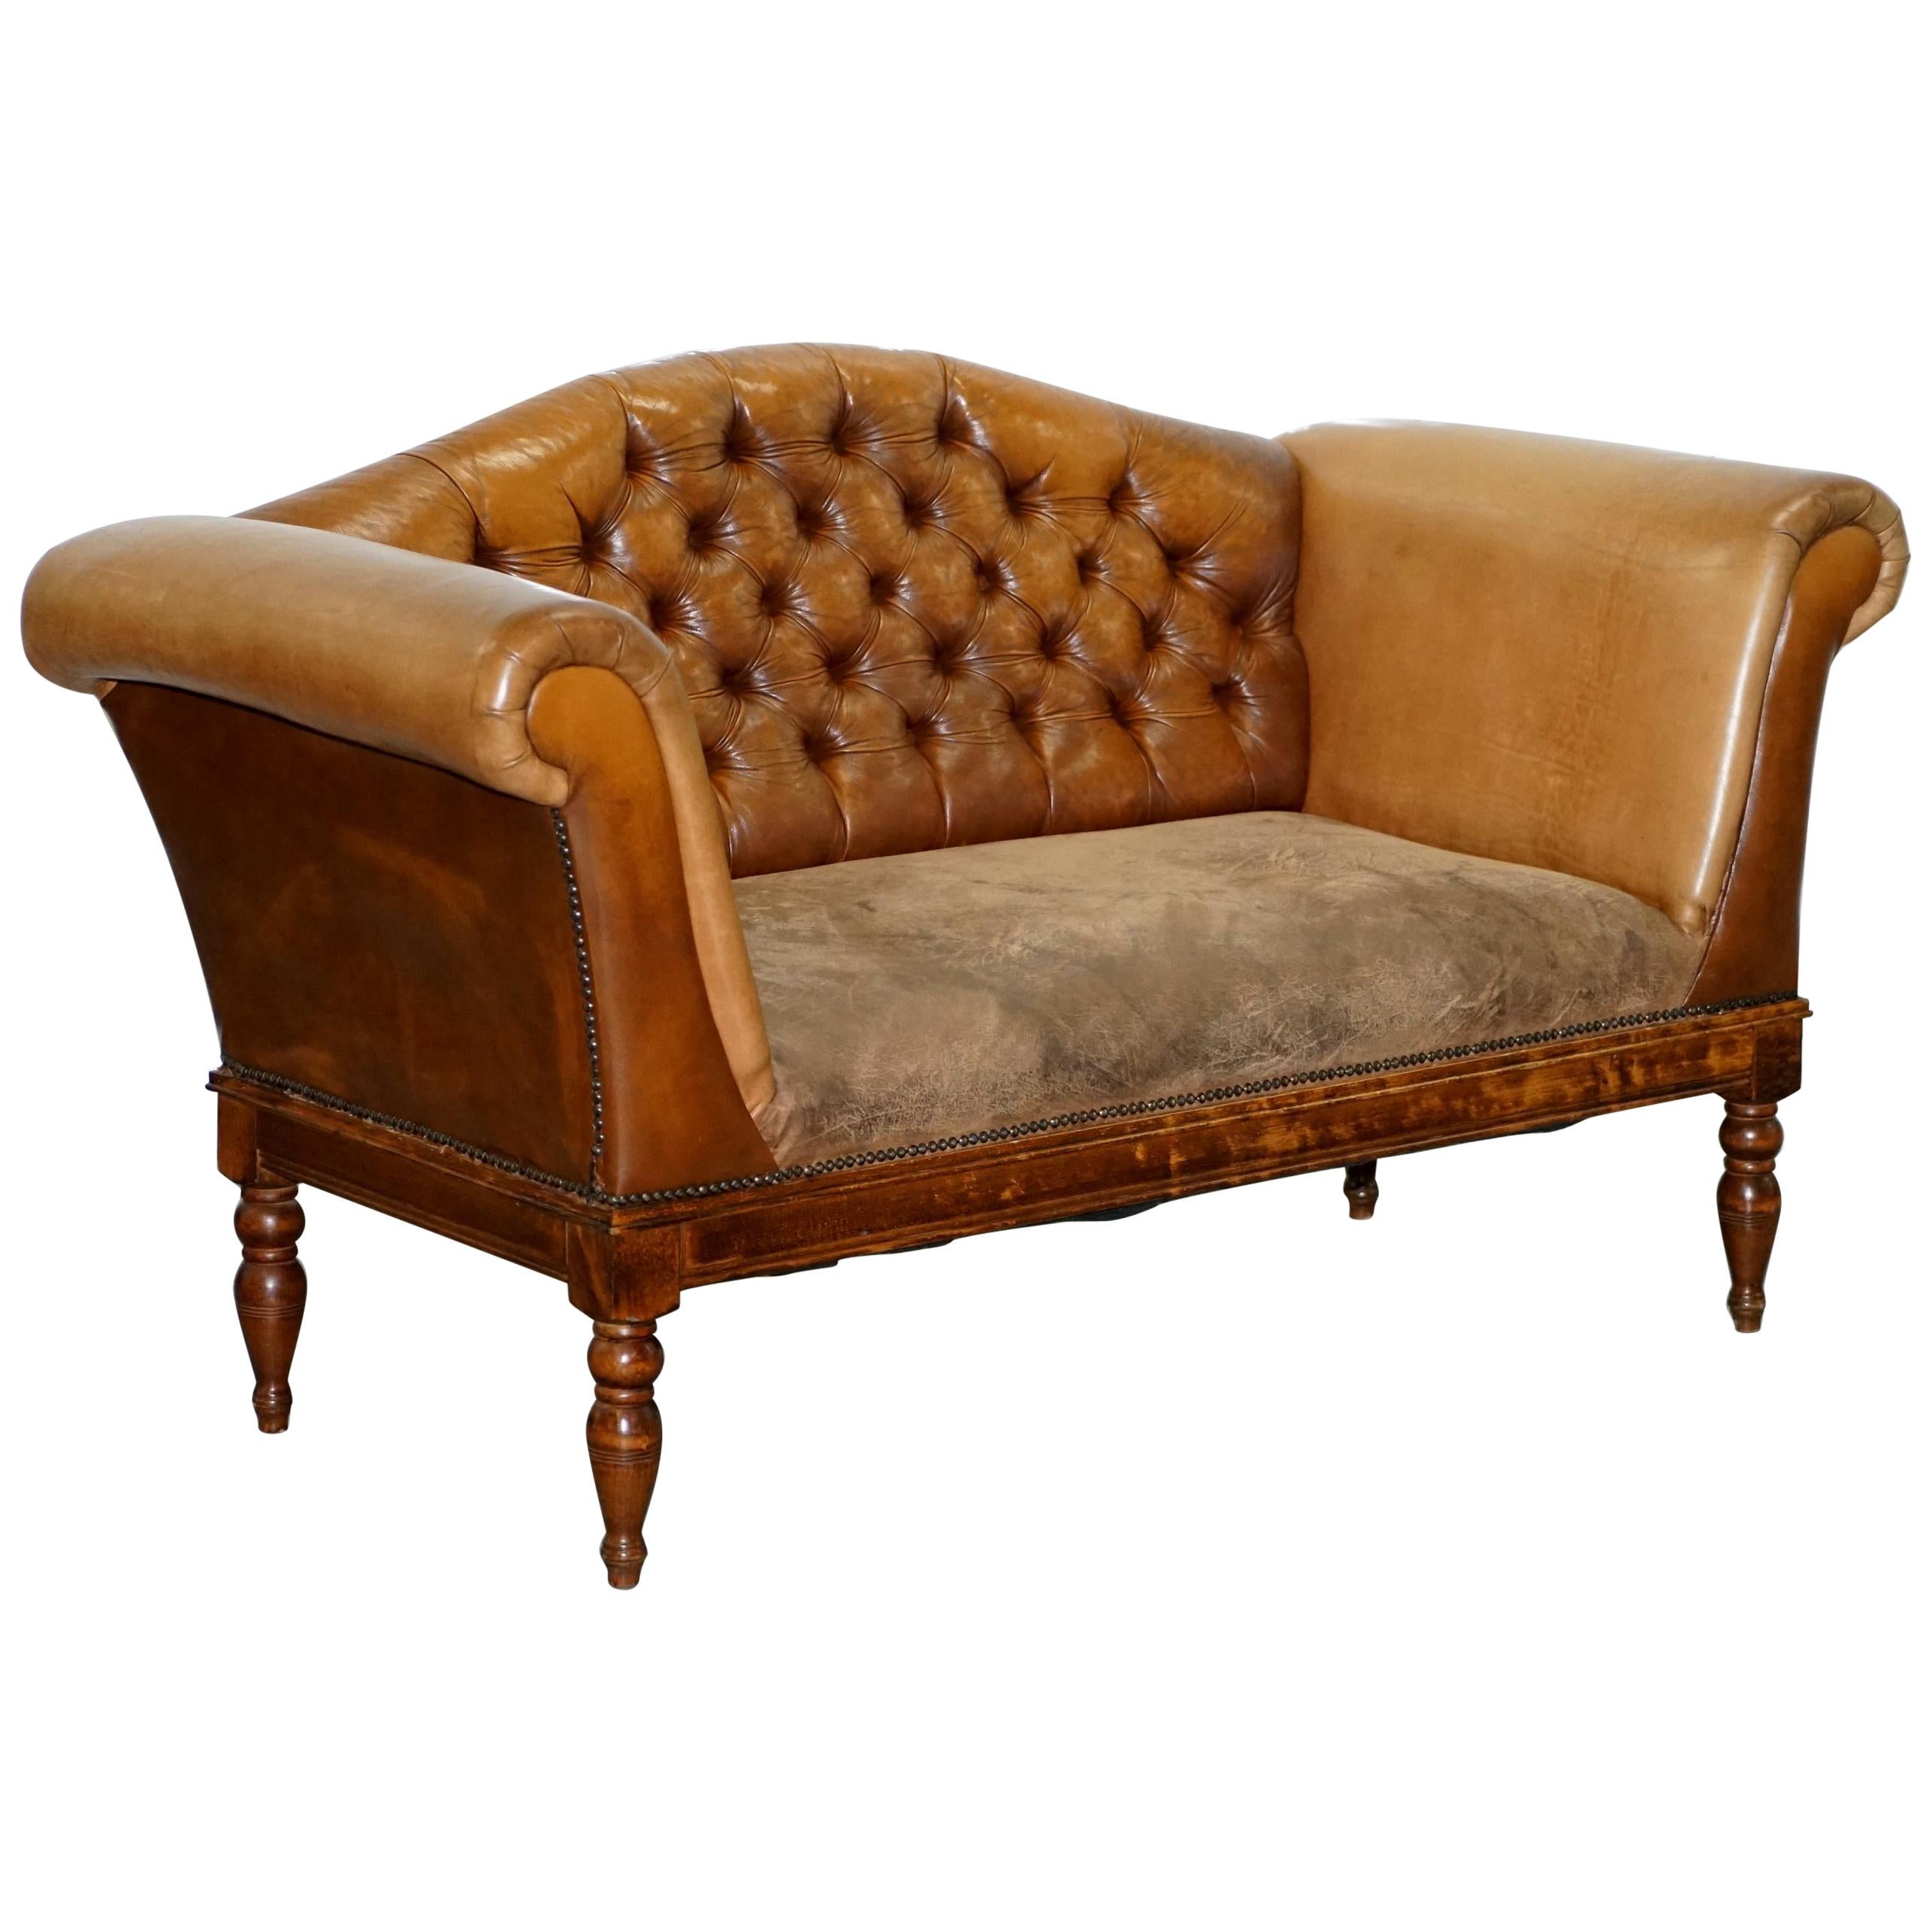 Mixed Brown Leather Chesterfield Two-Seat Club Sofa with Suede Leather Base